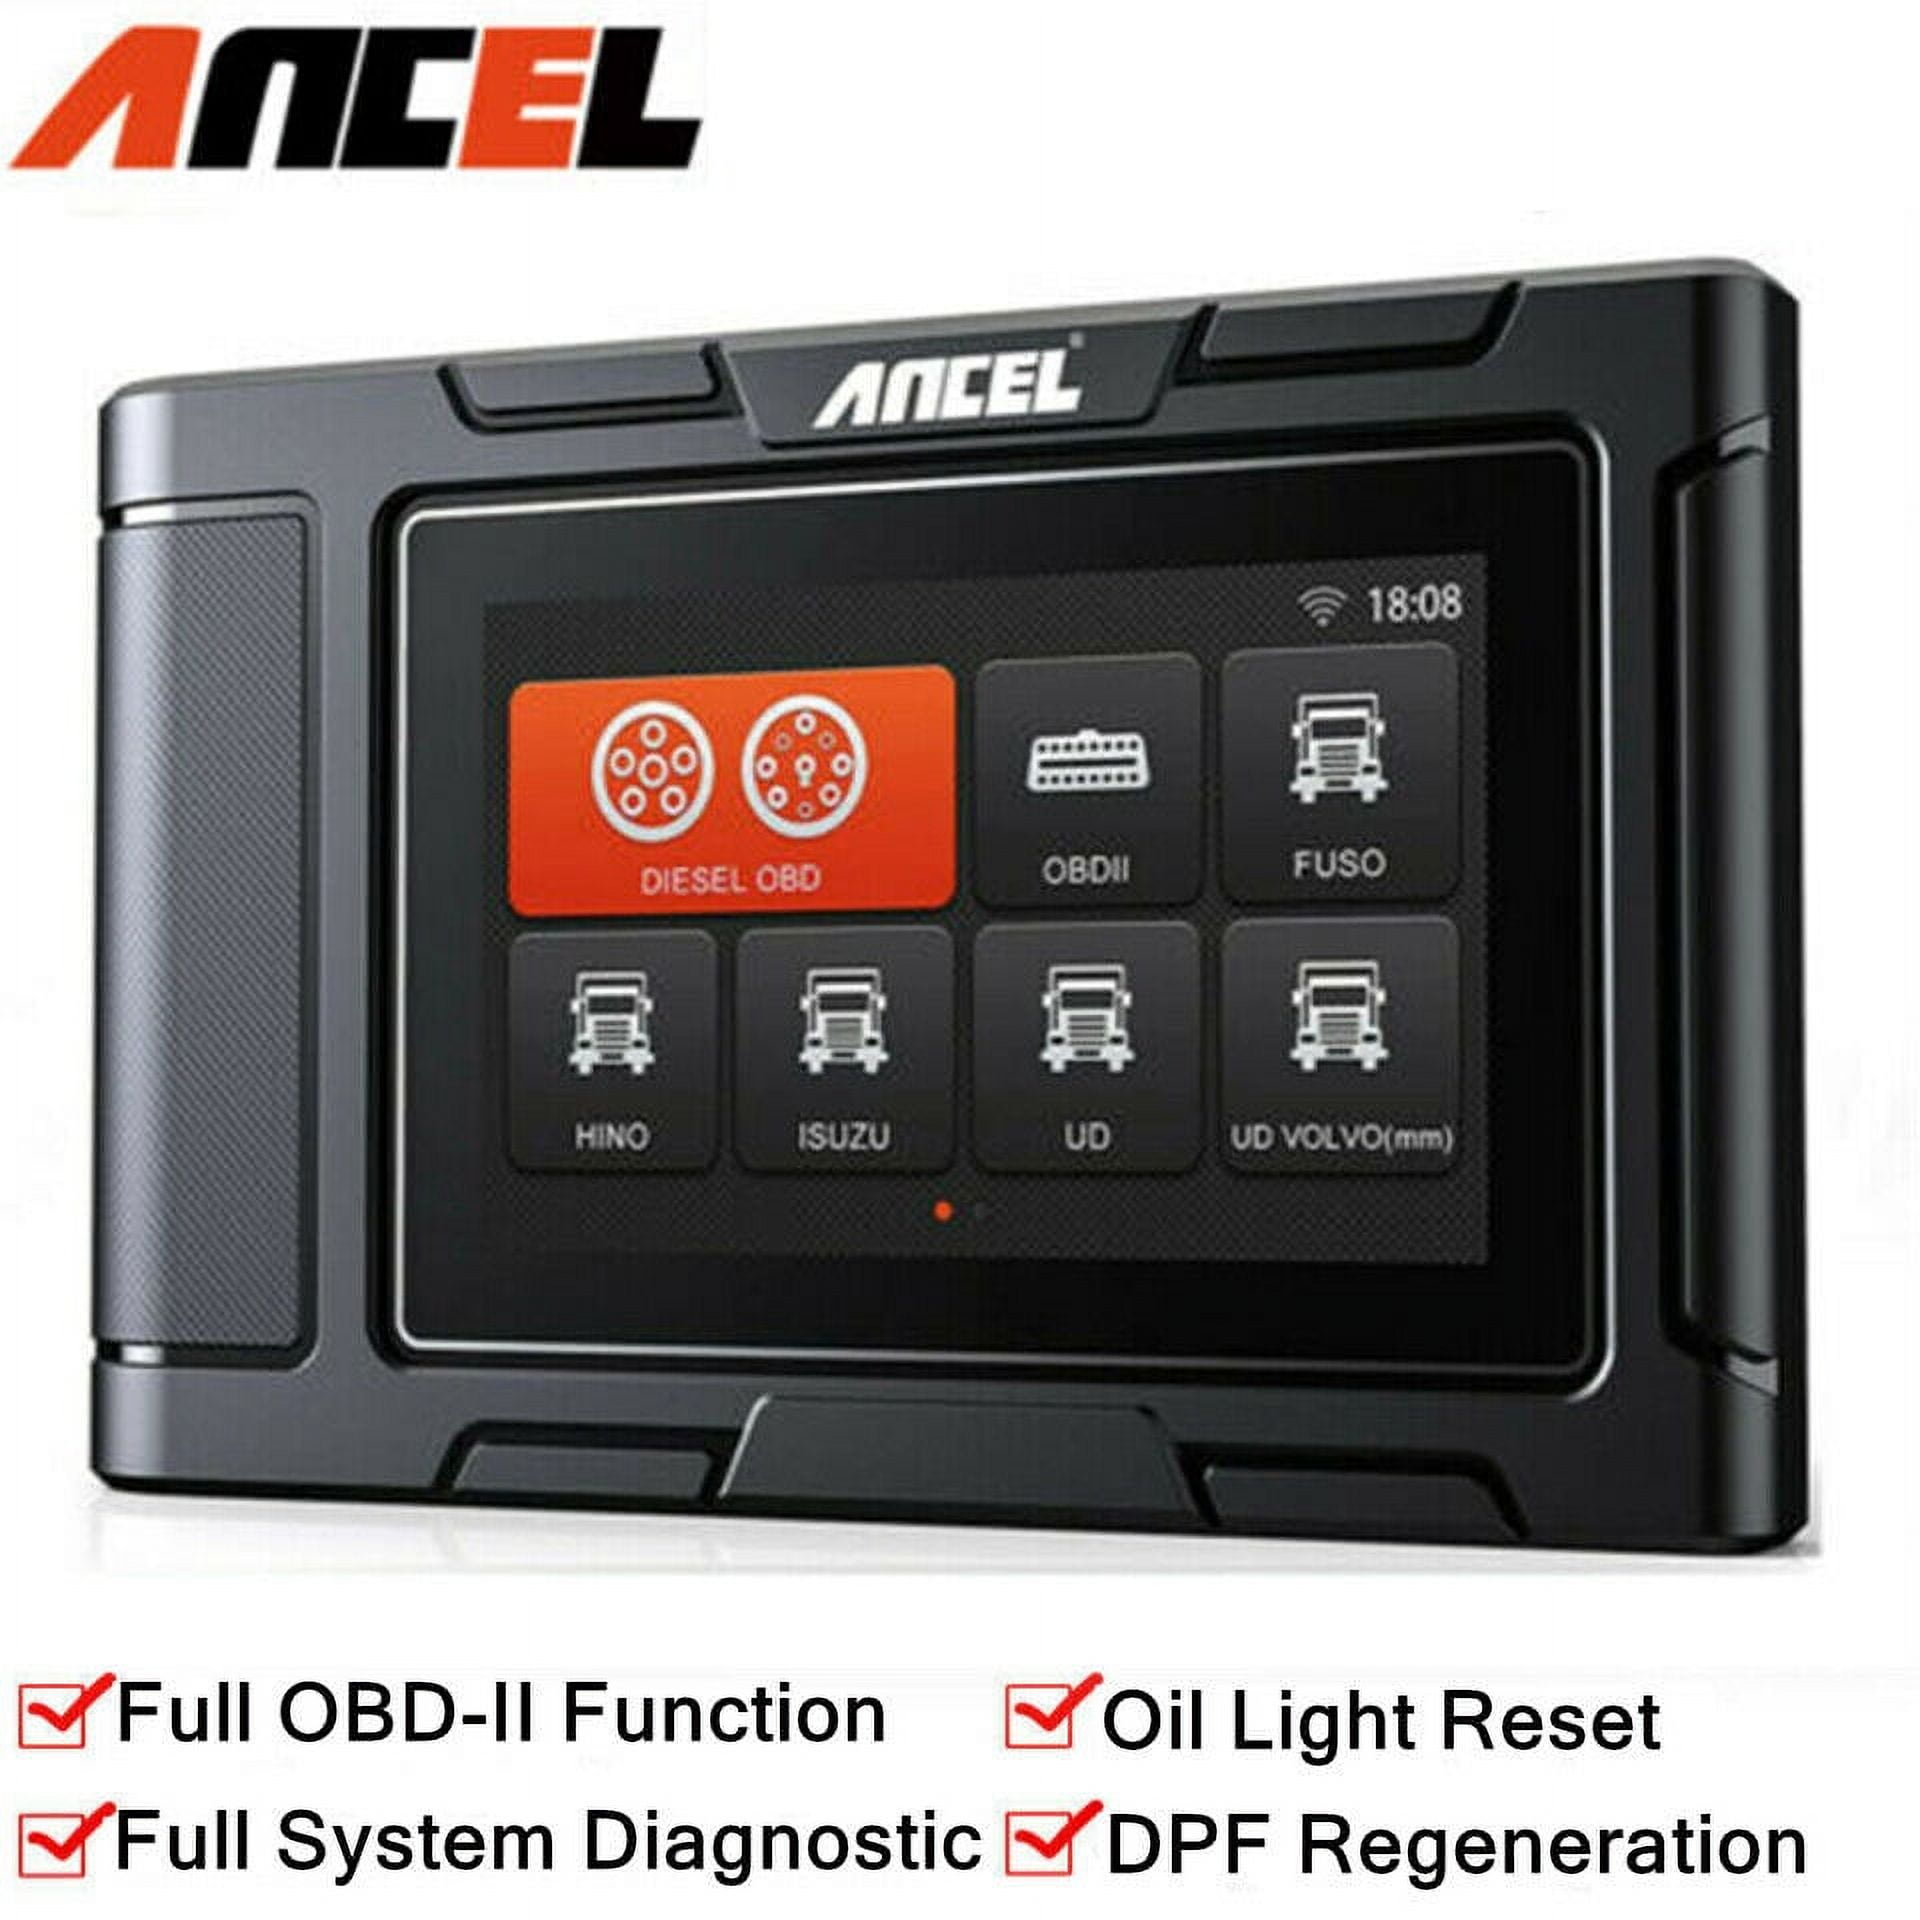 ANCEL HD3500 Plus Professioanl Pickup Truck Scanner Diagnostic Tool Fit for  Ford/Chevrolet/Dodge/RAM/GMC Truck& Car, All Systems Diesel Code Reader